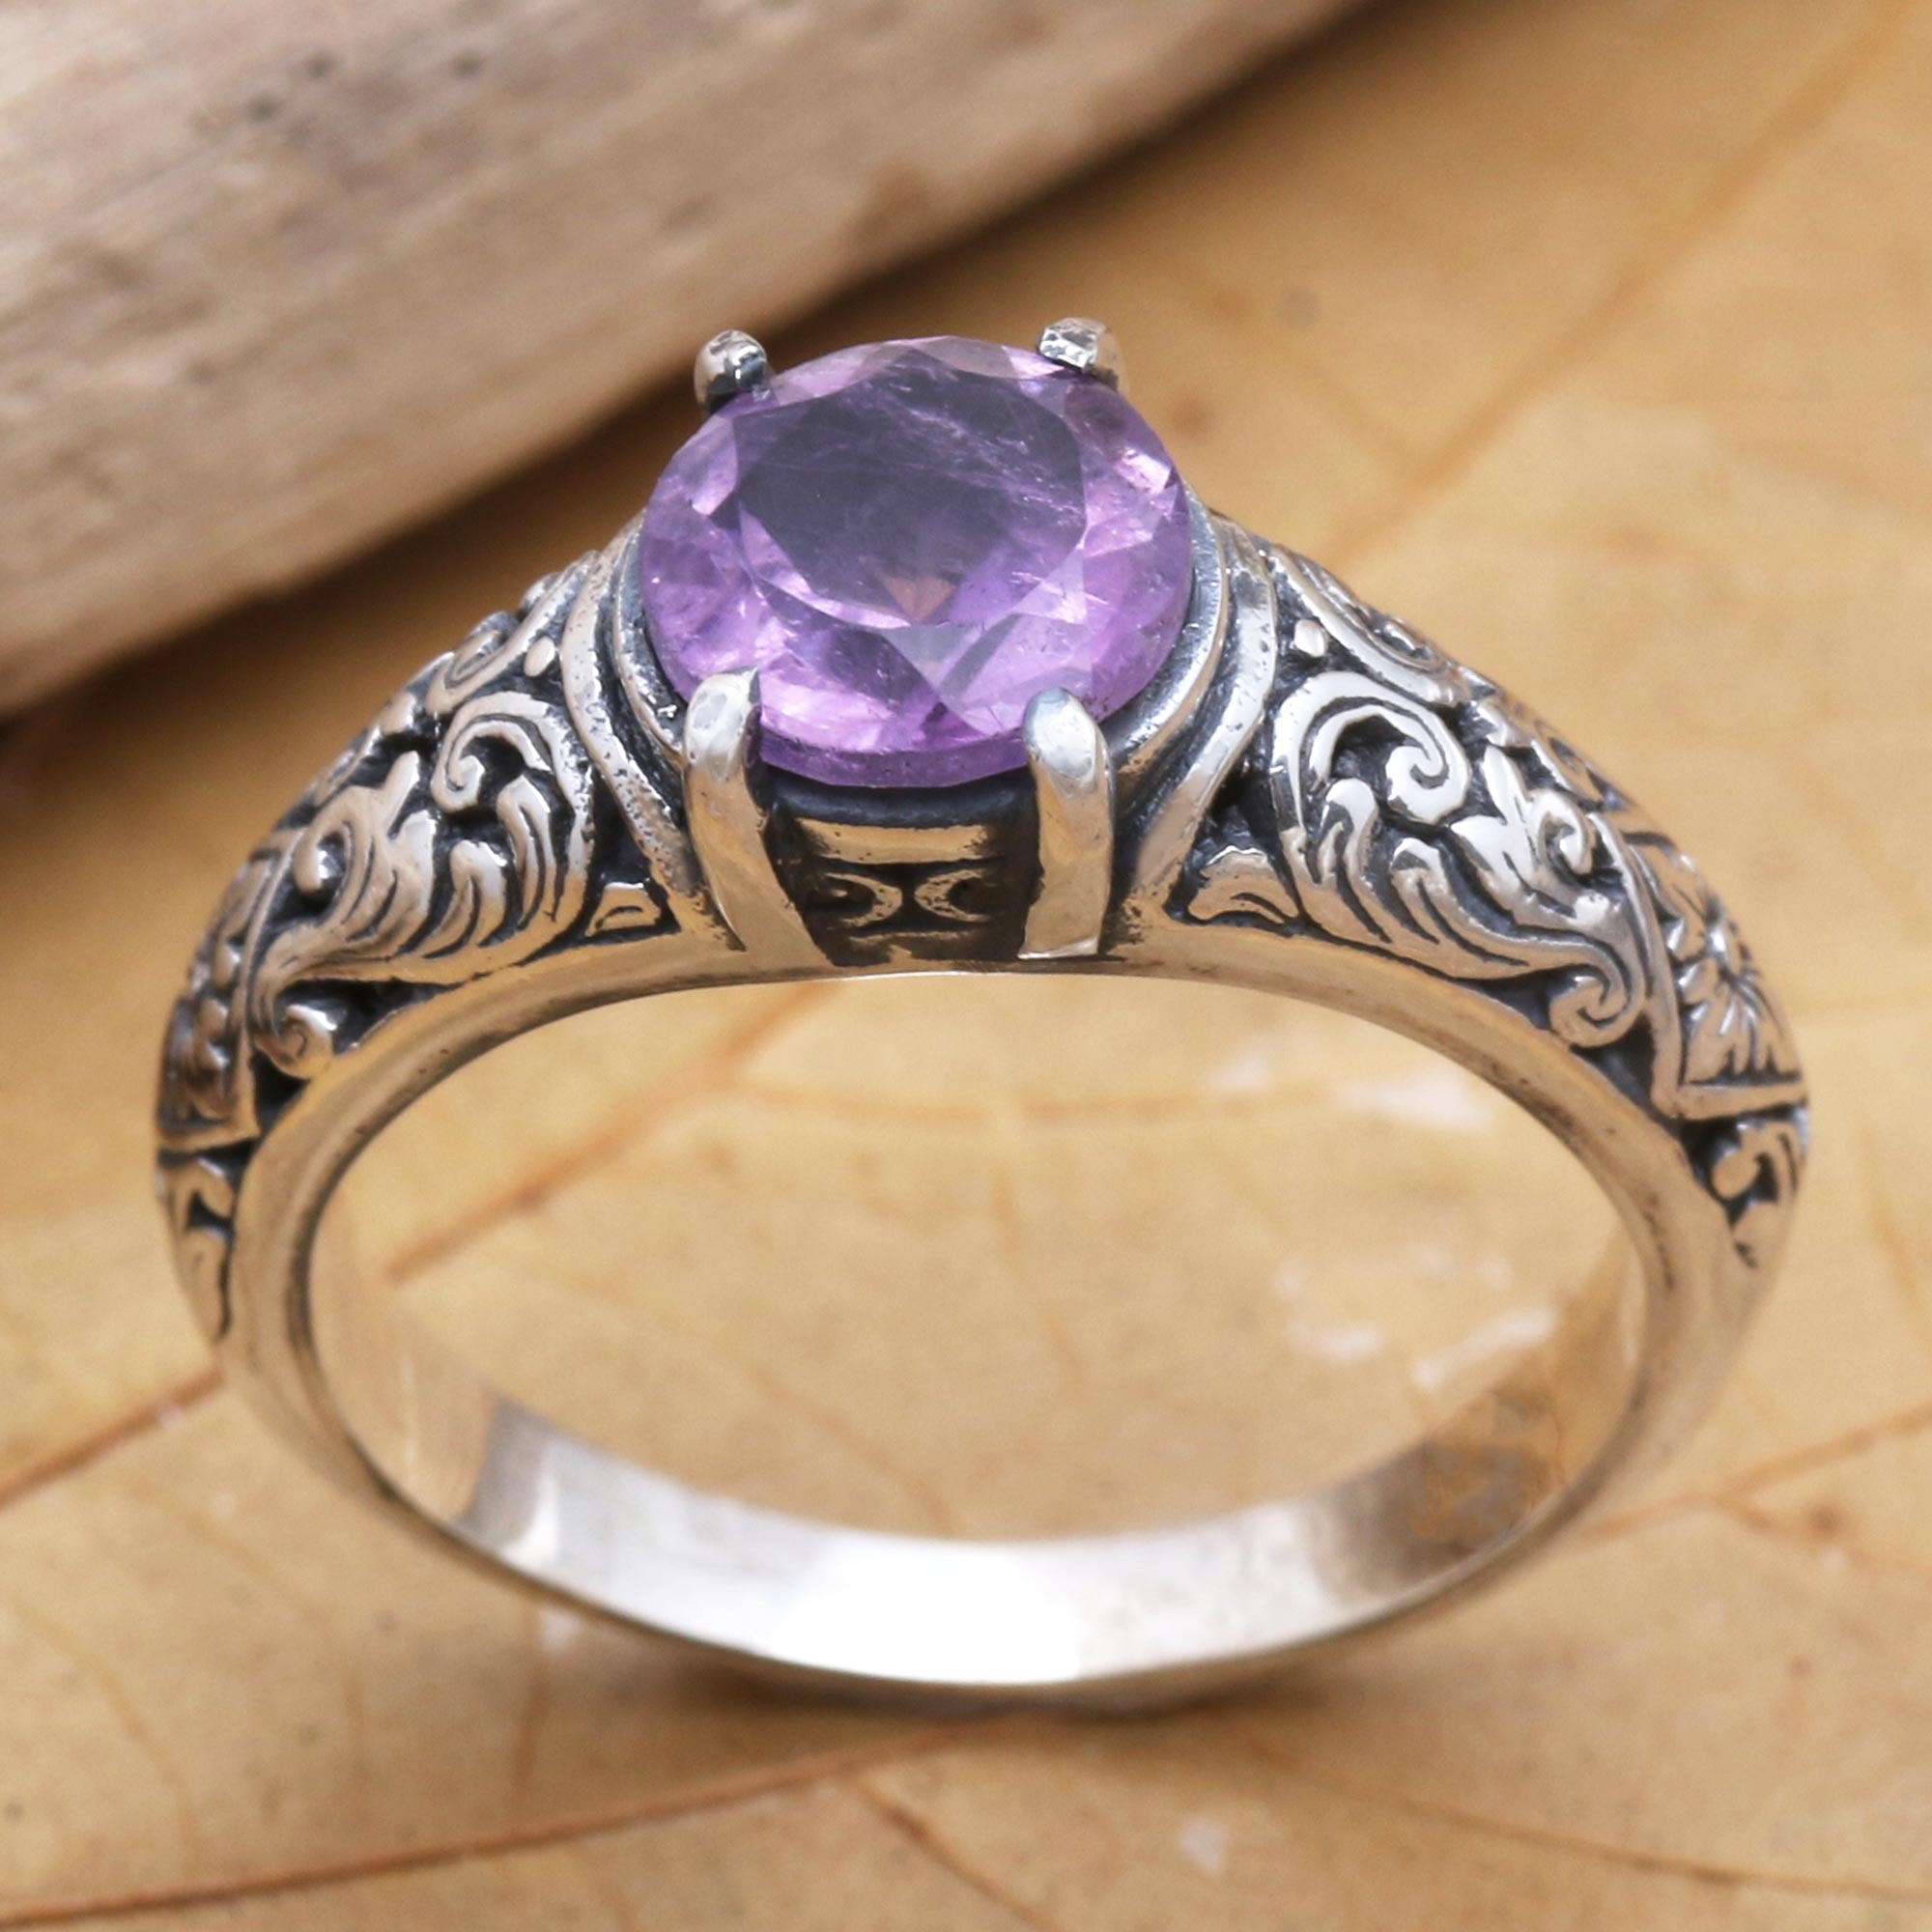 Natural amethyst ring-faceted amethyst ring-cocktail ring-gemstone ring-925 silver ring-purple amethyst ring-natural gemstone ring